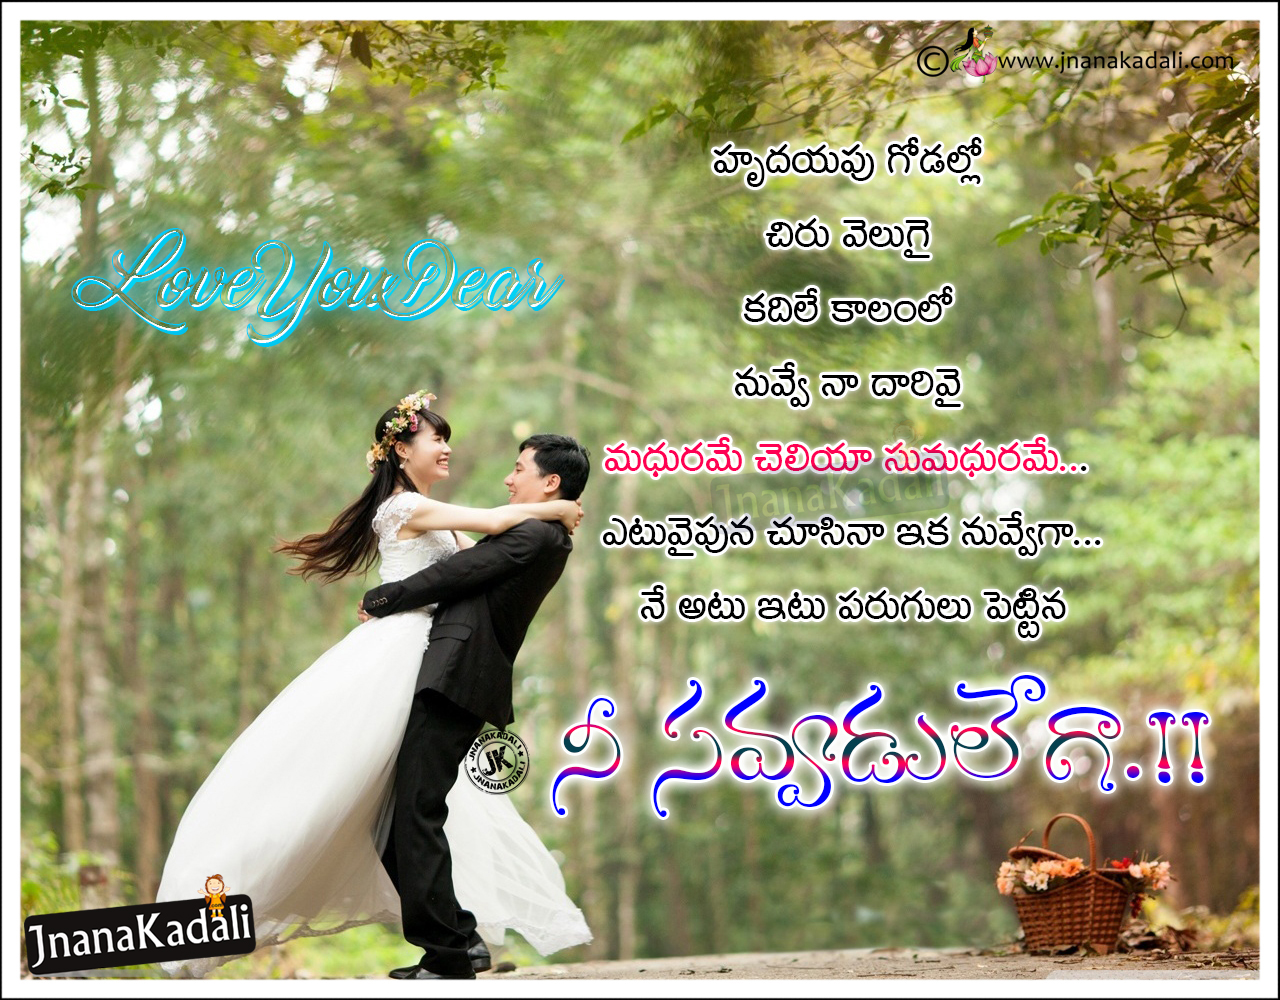 Romantic Telugu Love Quotes-Couple hd Wallpapers With Romantic ...